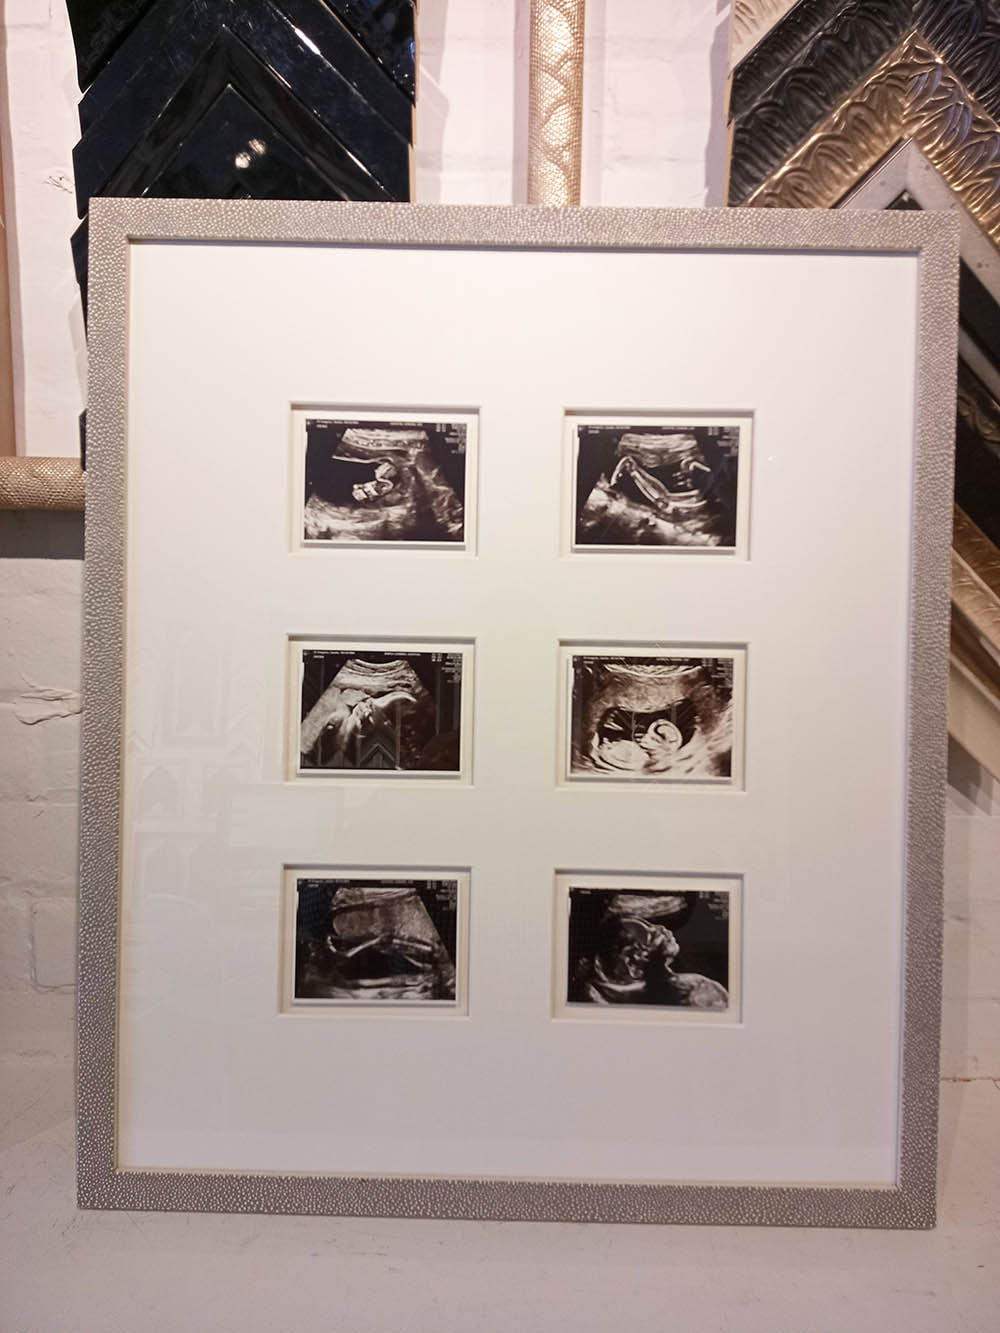 Le Frame Shoppe Blog | Baby's first